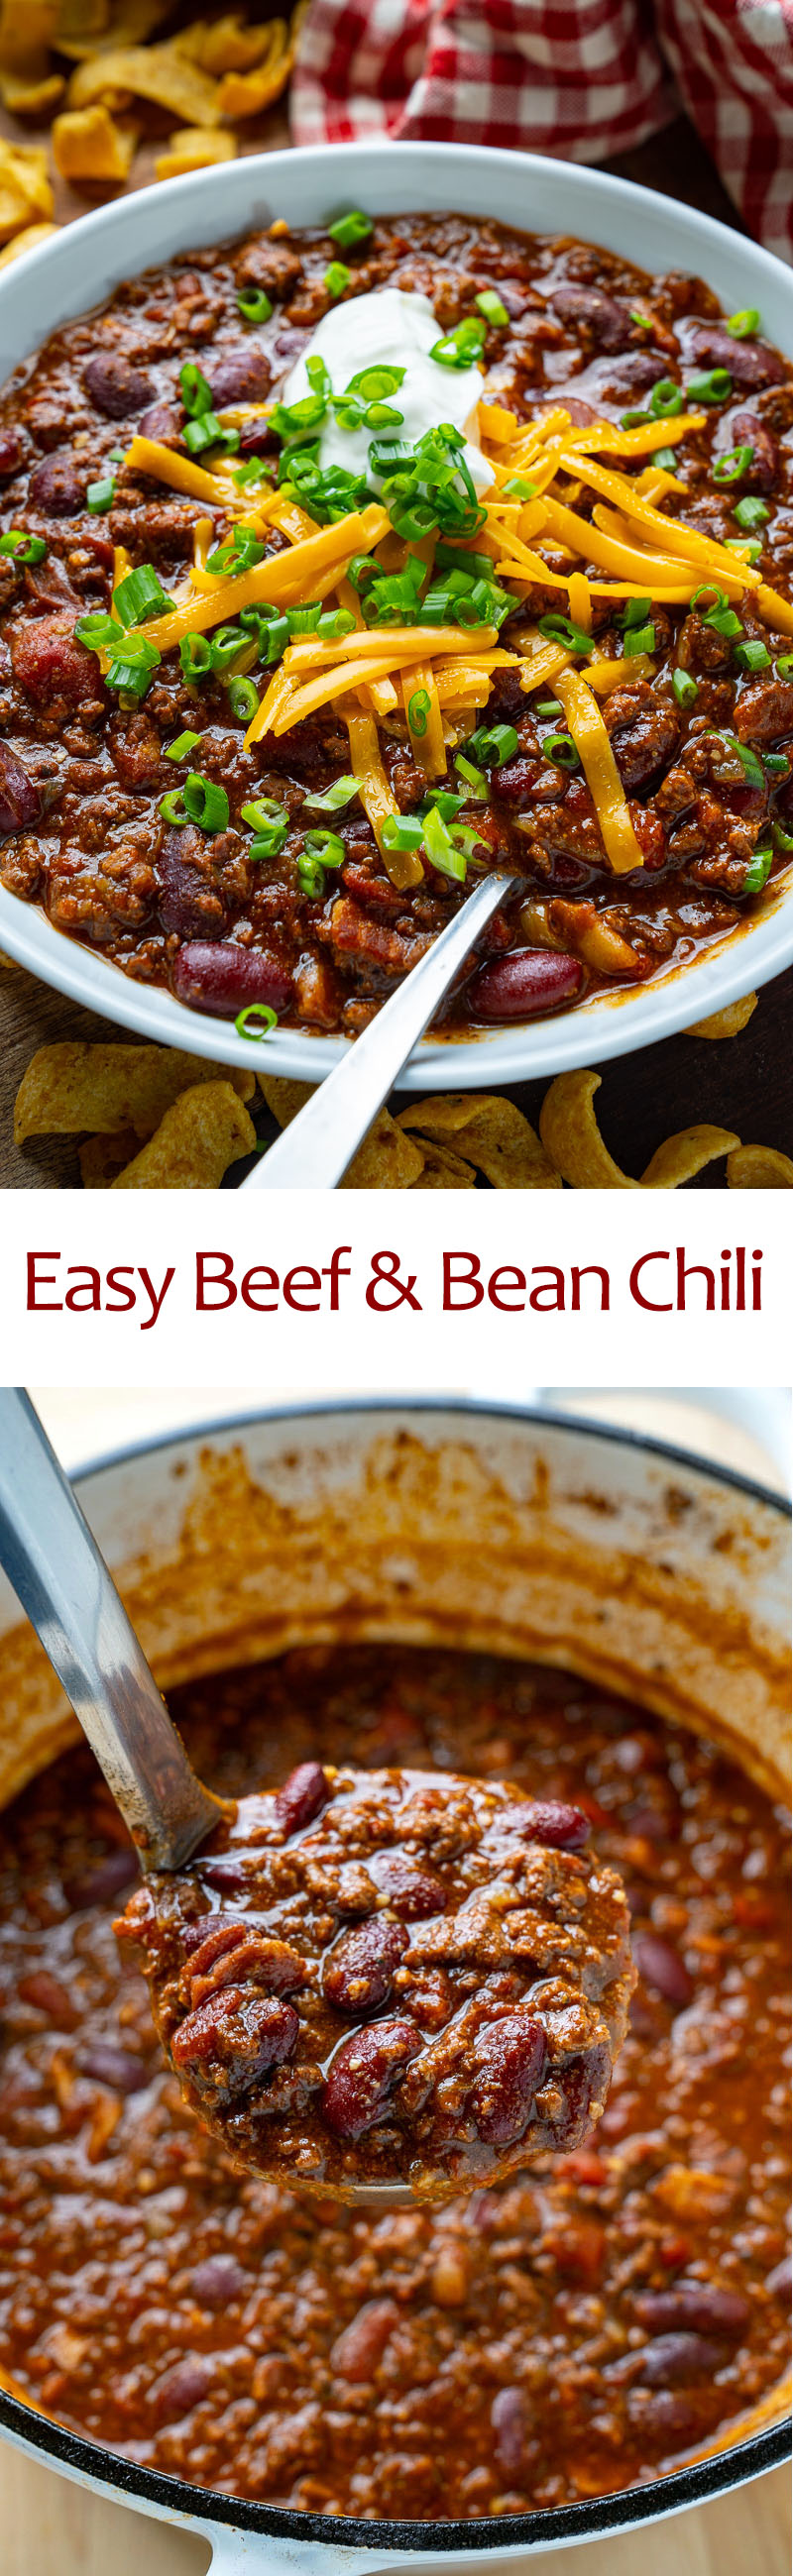 Easy Beef and Bean Chili - Closet Cooking